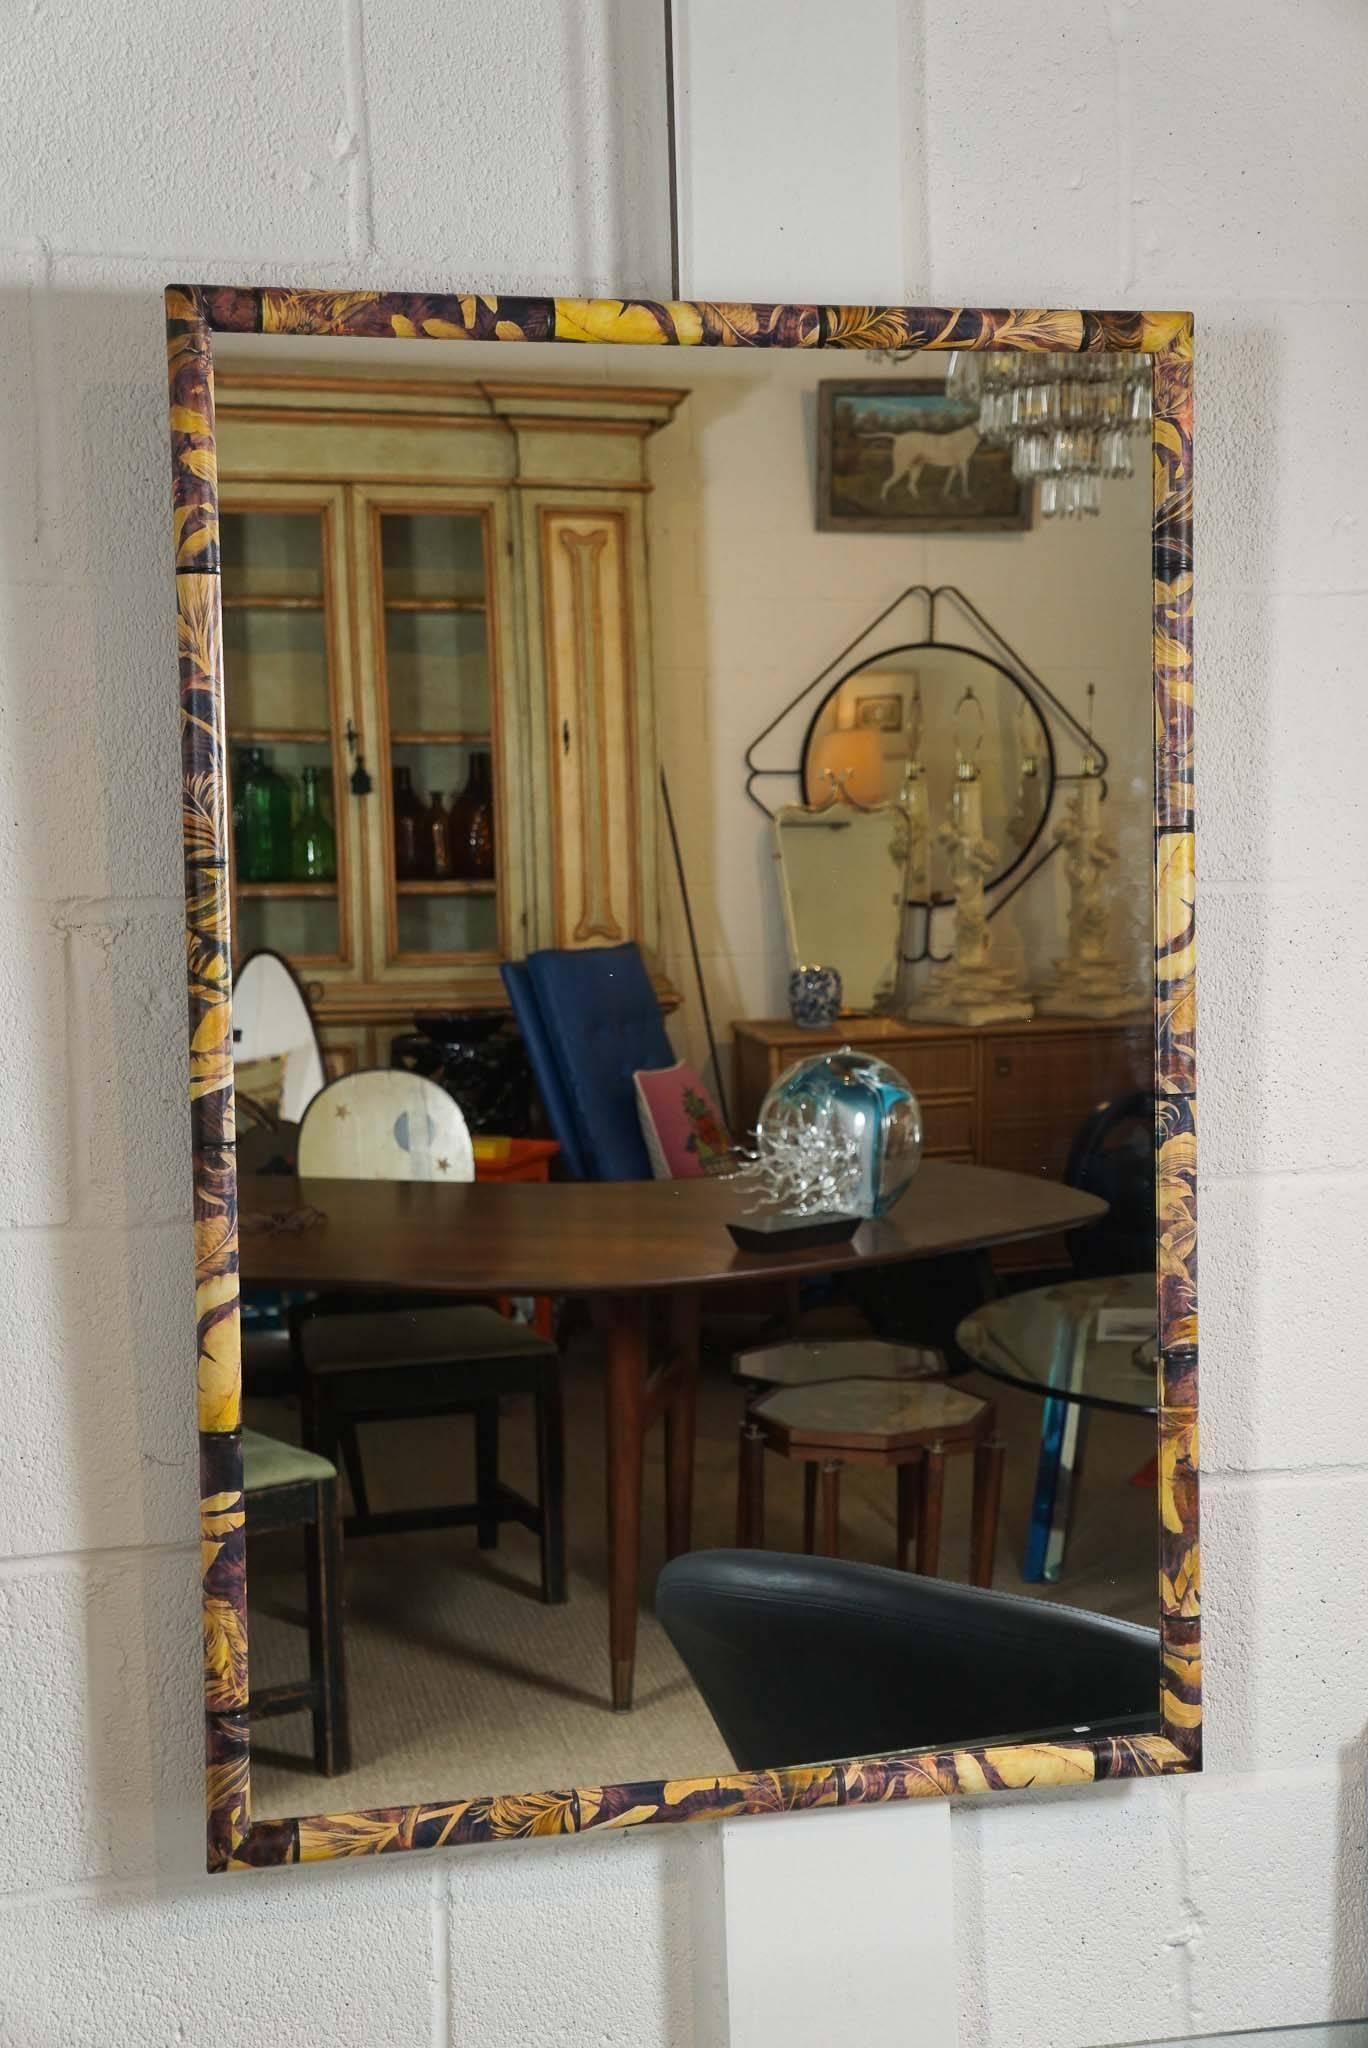 Here is a beautiful decoupage mirror in a banana leaf pattern with an incised bamboo motif. The narrow frame is wood and the surface is paper with a clear coat polyurethane finish.